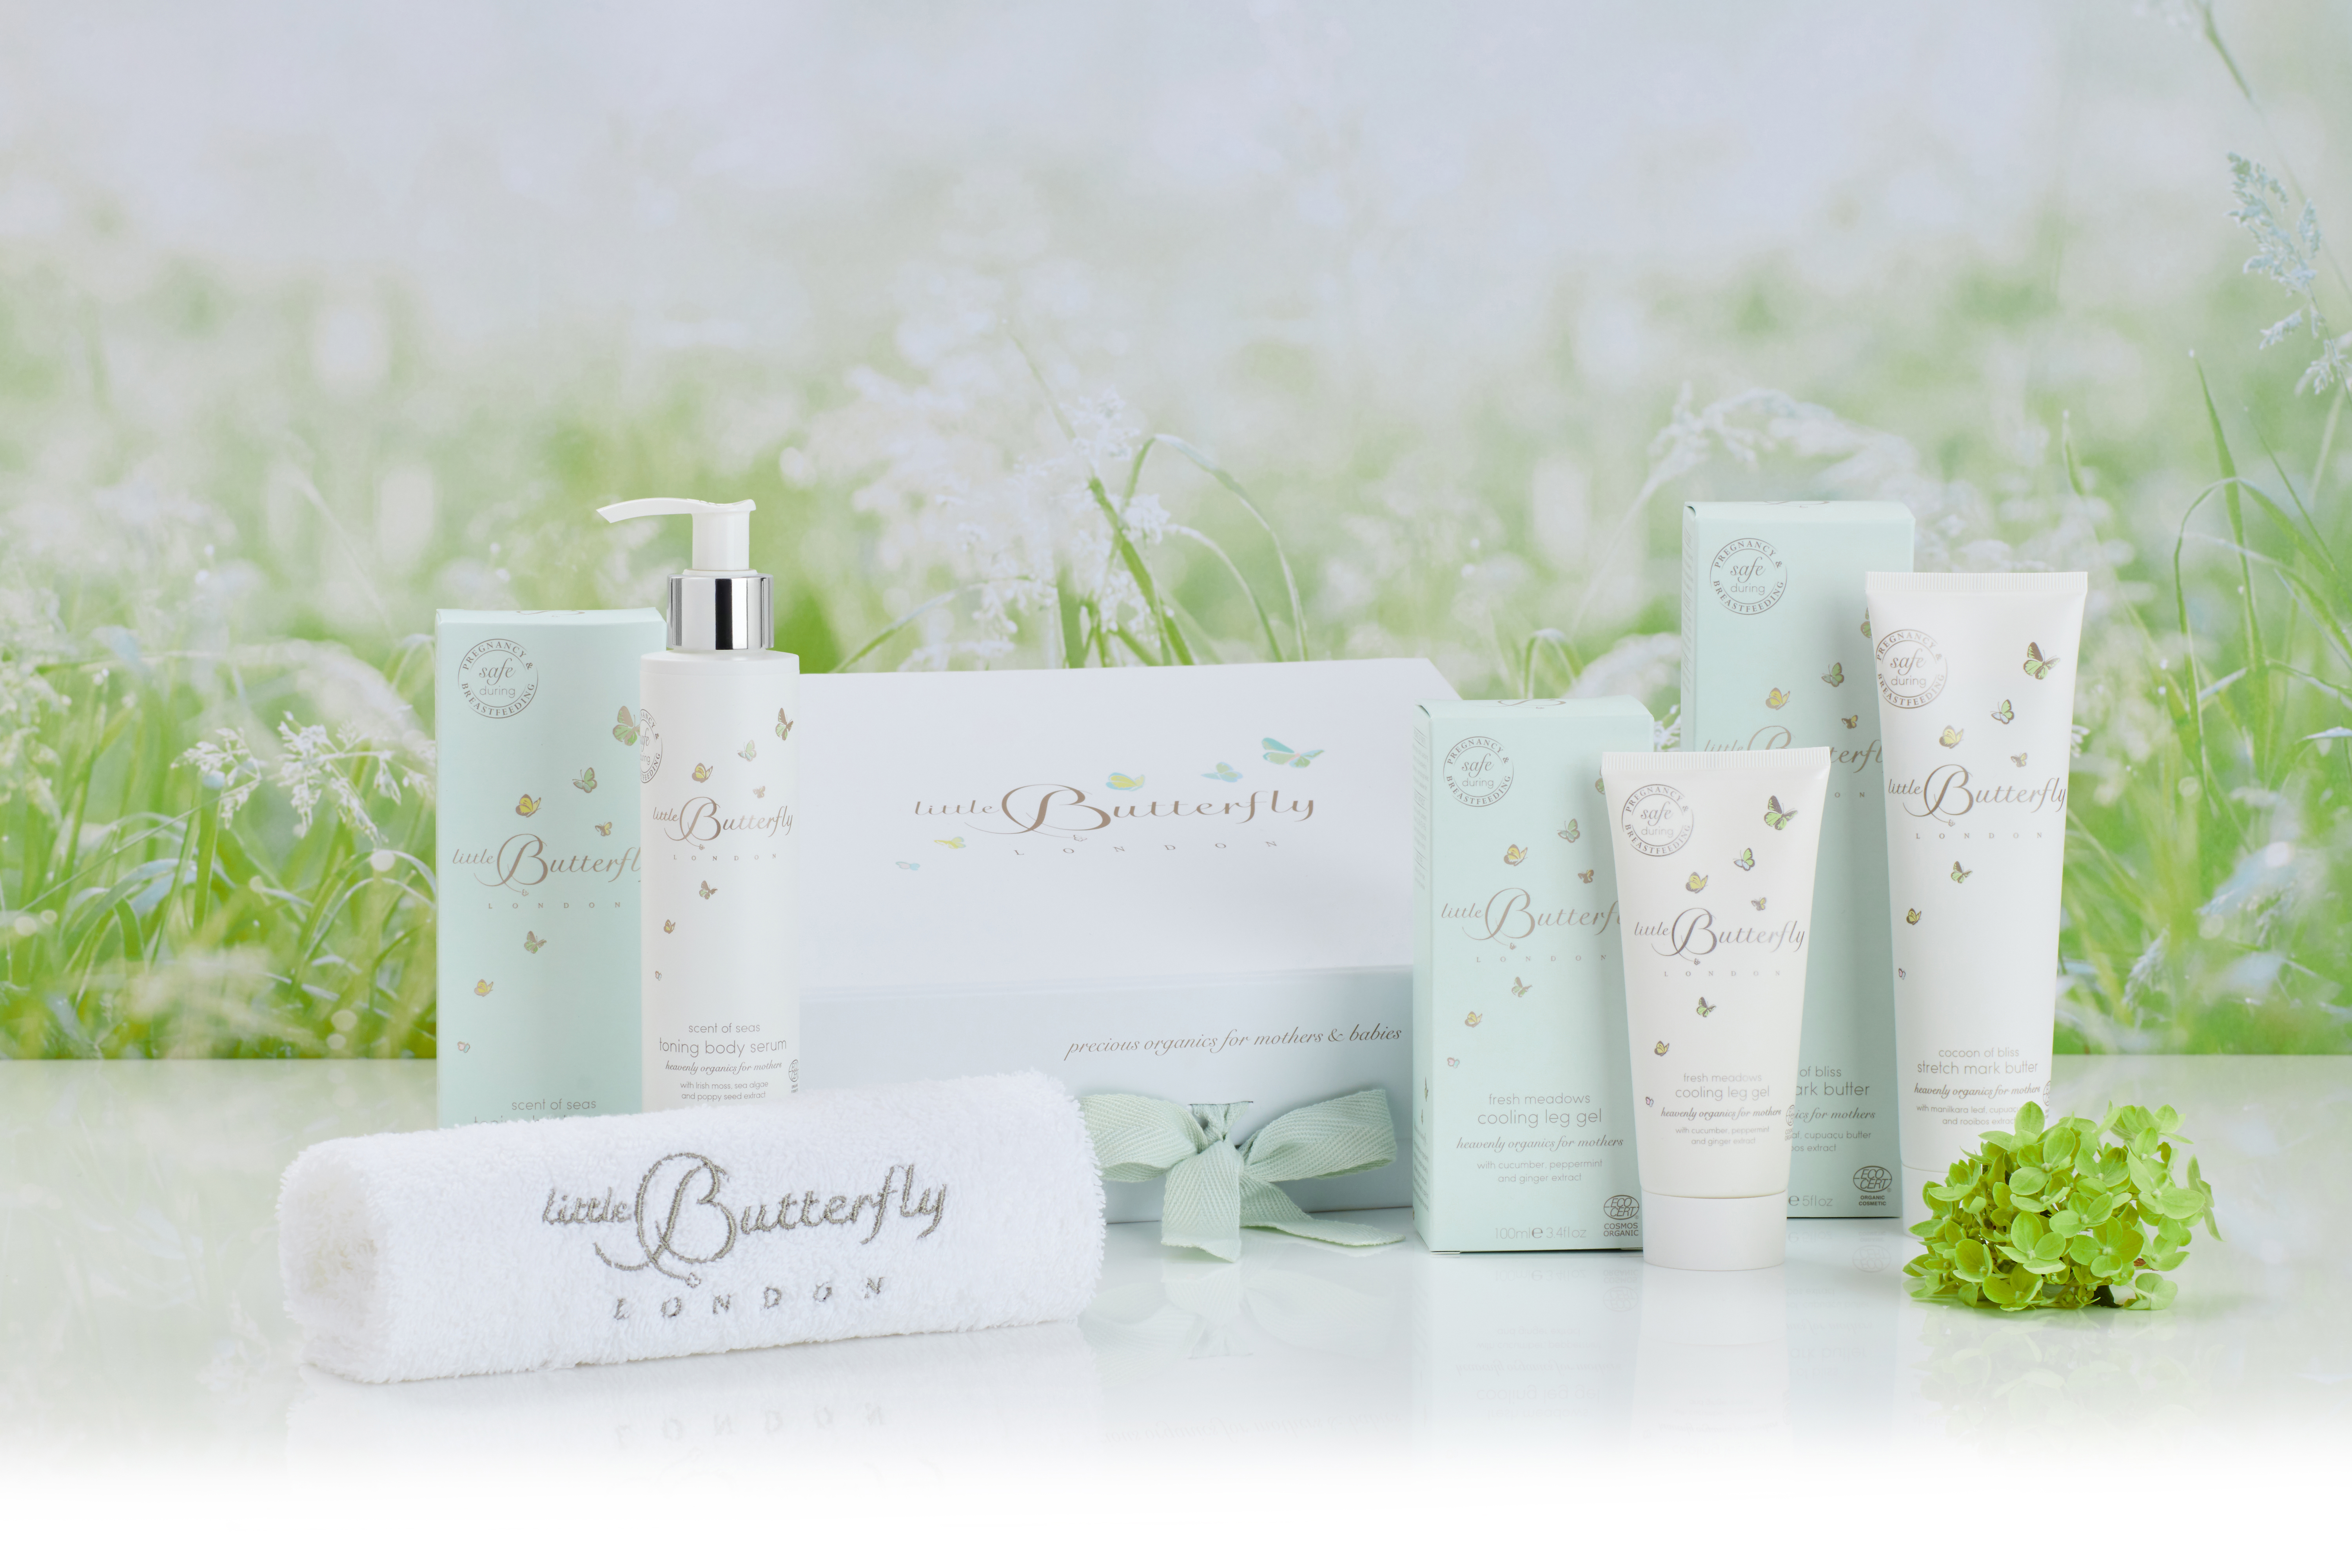 Mother's Day- The Pamper Gift Box from Little Butterfly London
